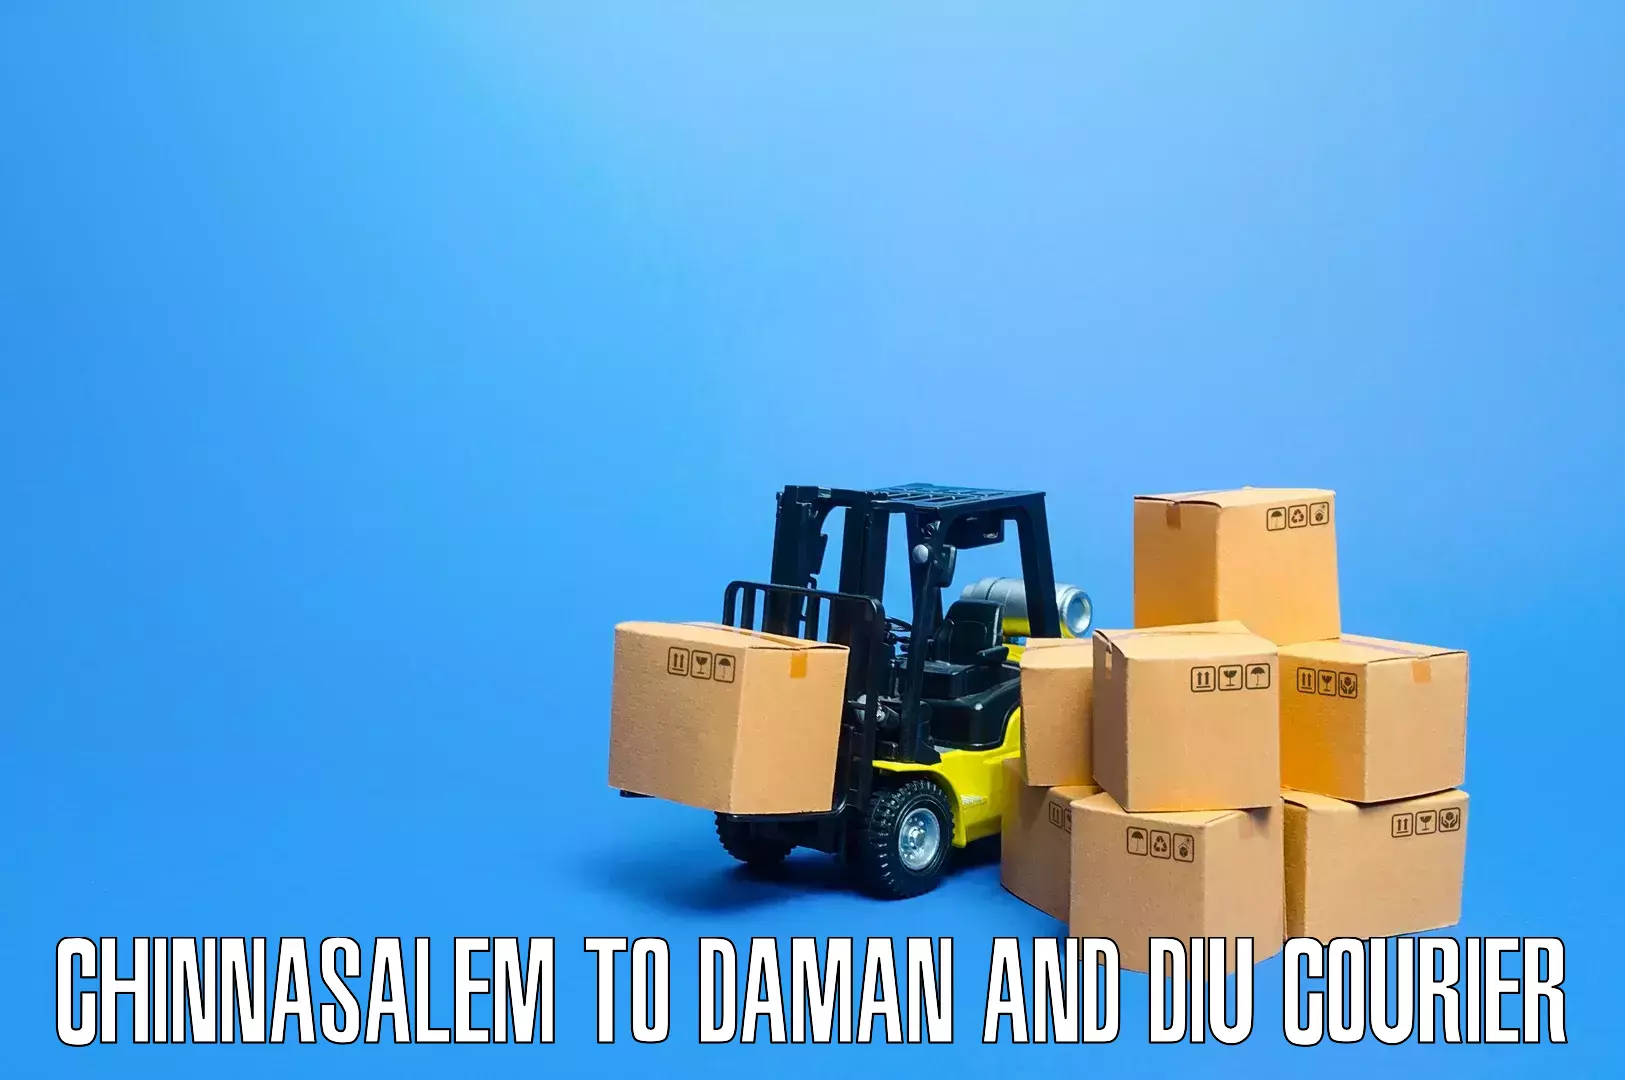 Home furniture relocation Chinnasalem to Daman and Diu